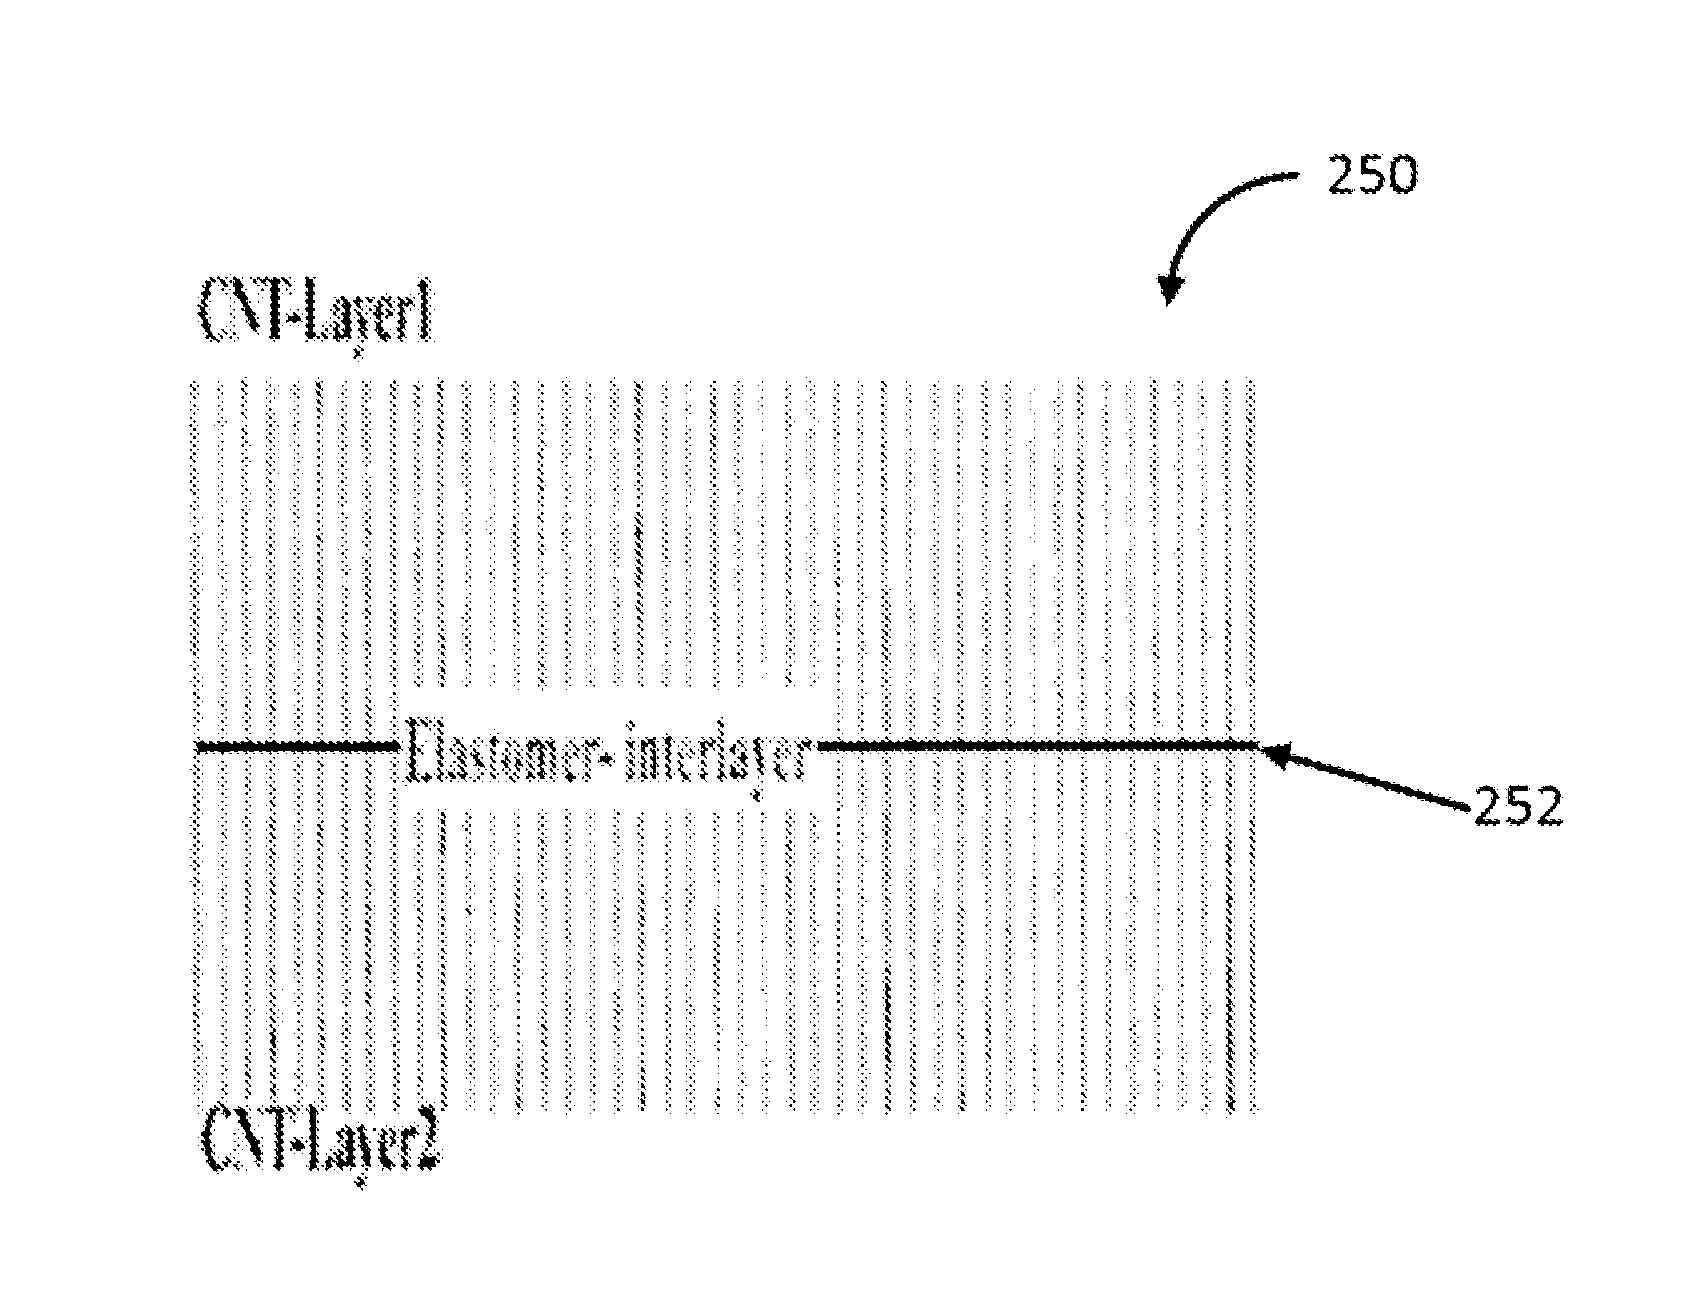 Materials and methods for thermal and electrical conductivity